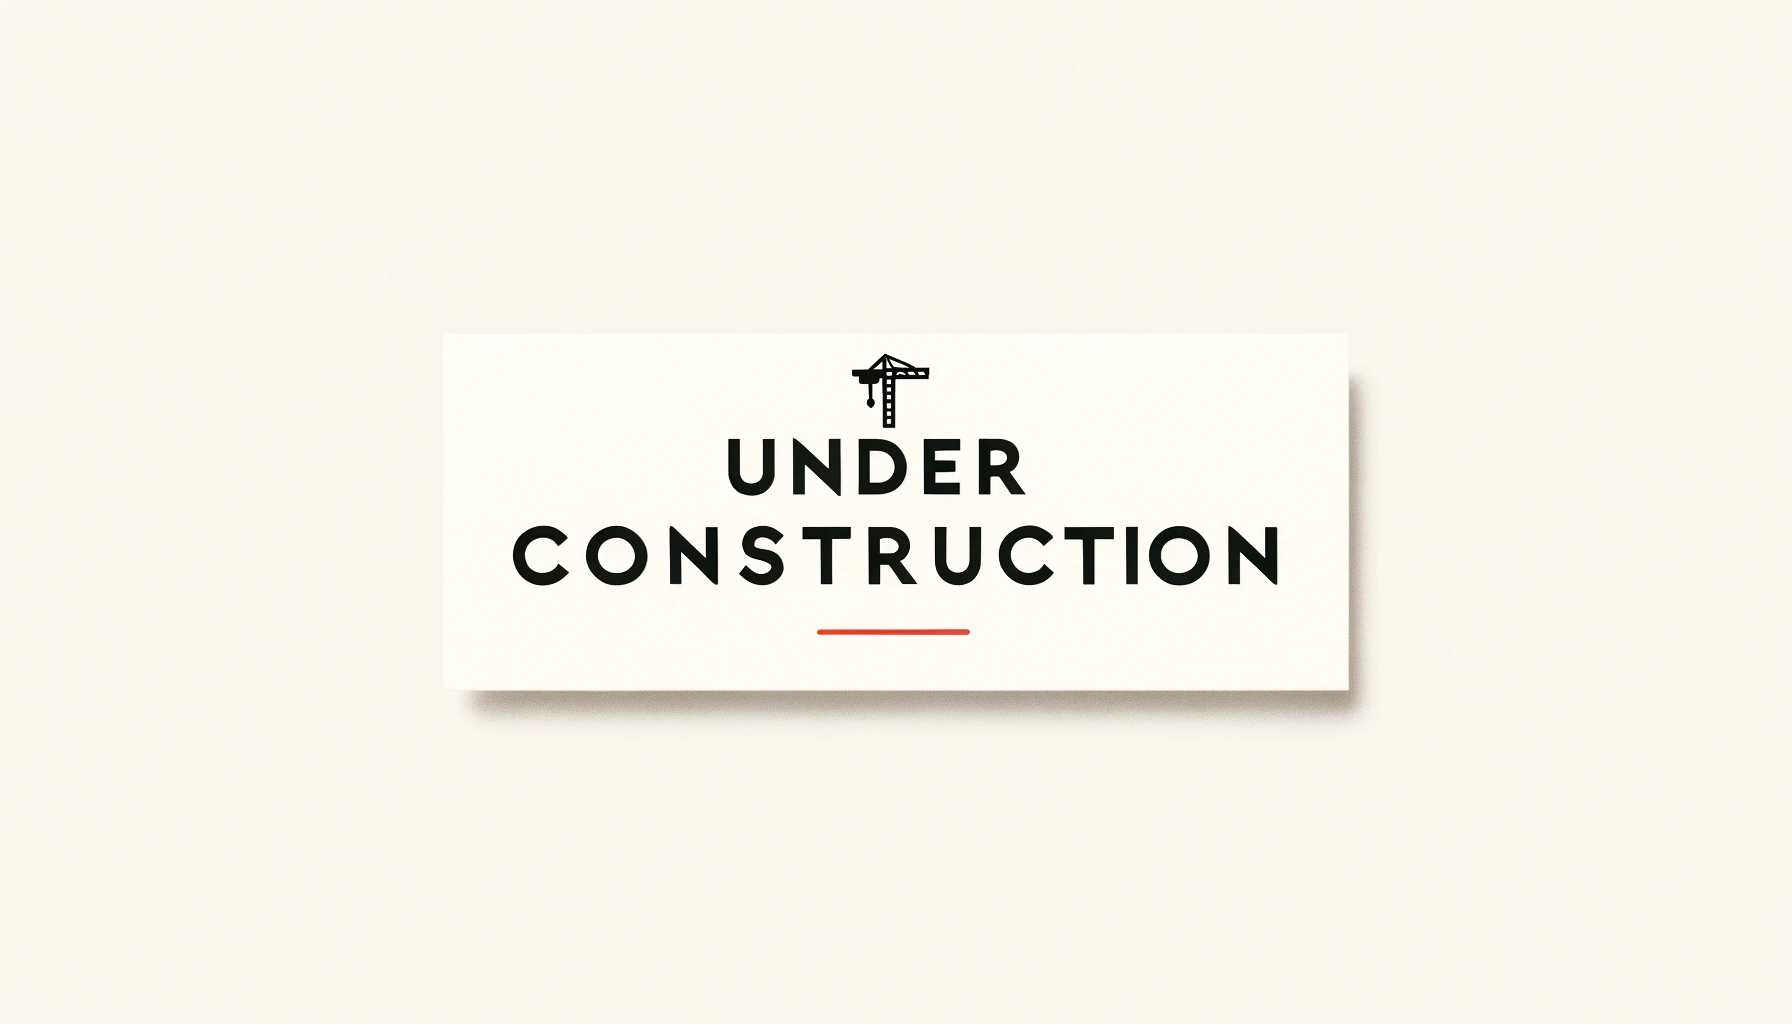 Simple banner with a clean white background. In the center, the words 'Under Construction' are written in elegant black font, underscored by a thin red line and accompanied by a small crane icon to the left.